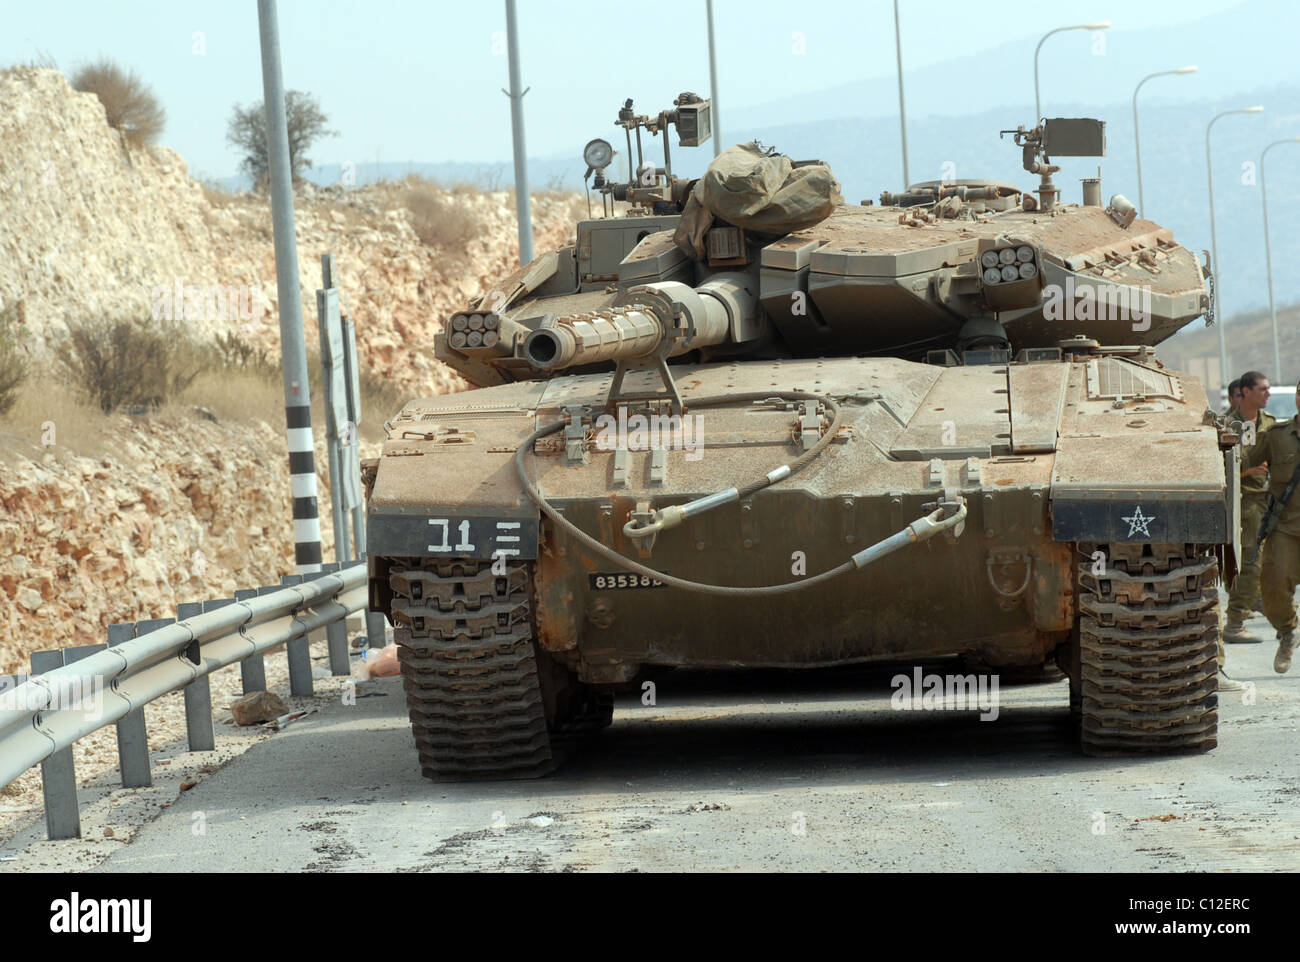 The Merkava (Hebrew: מרכבה (help·info), Chariot) is the main battle tank of the Israel Defense Forces. Stock Photo